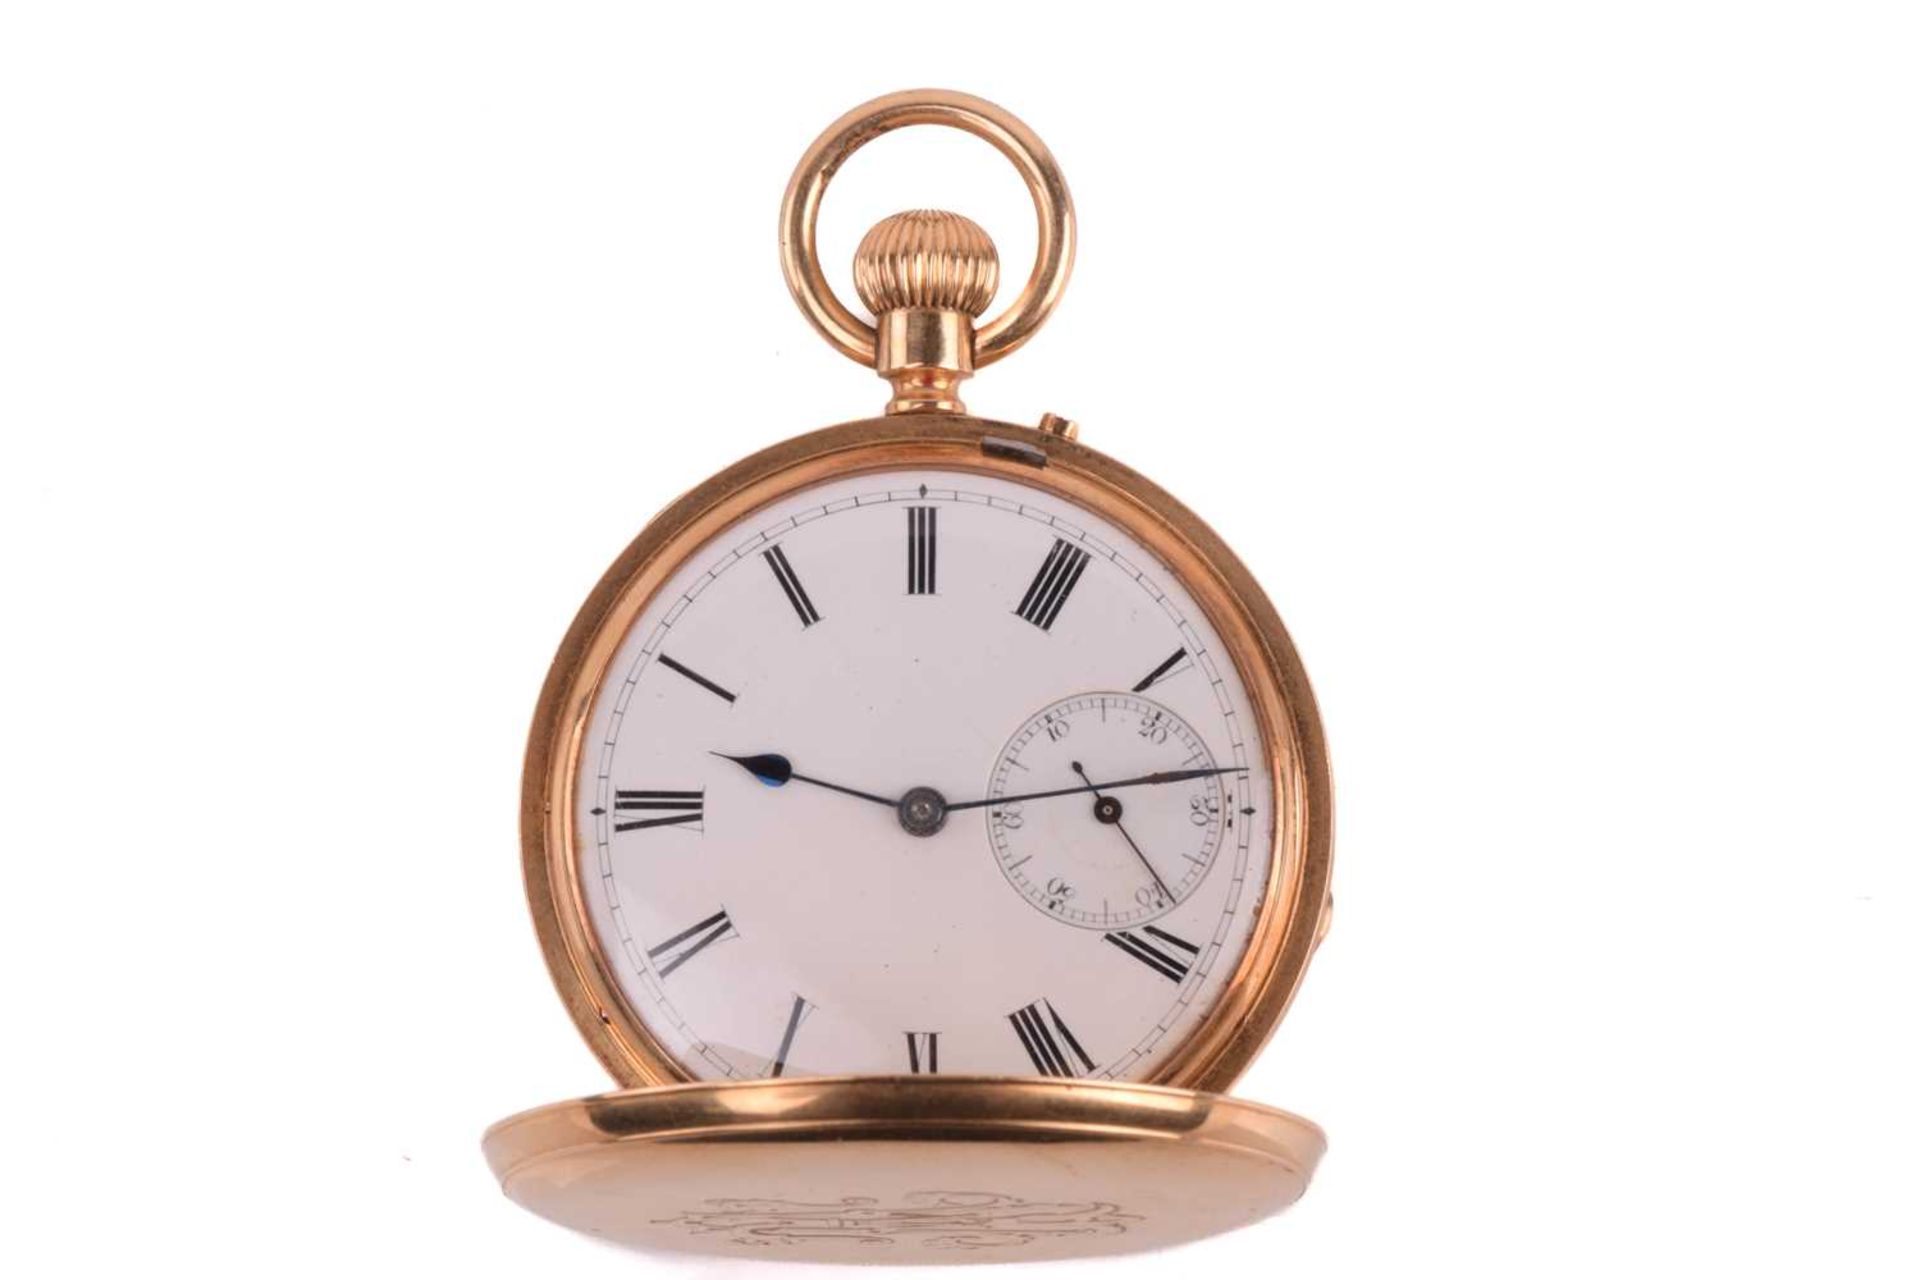 An 18ct gold Barwise London full hunter pocket watch, featuring a keyless wound signed movement in